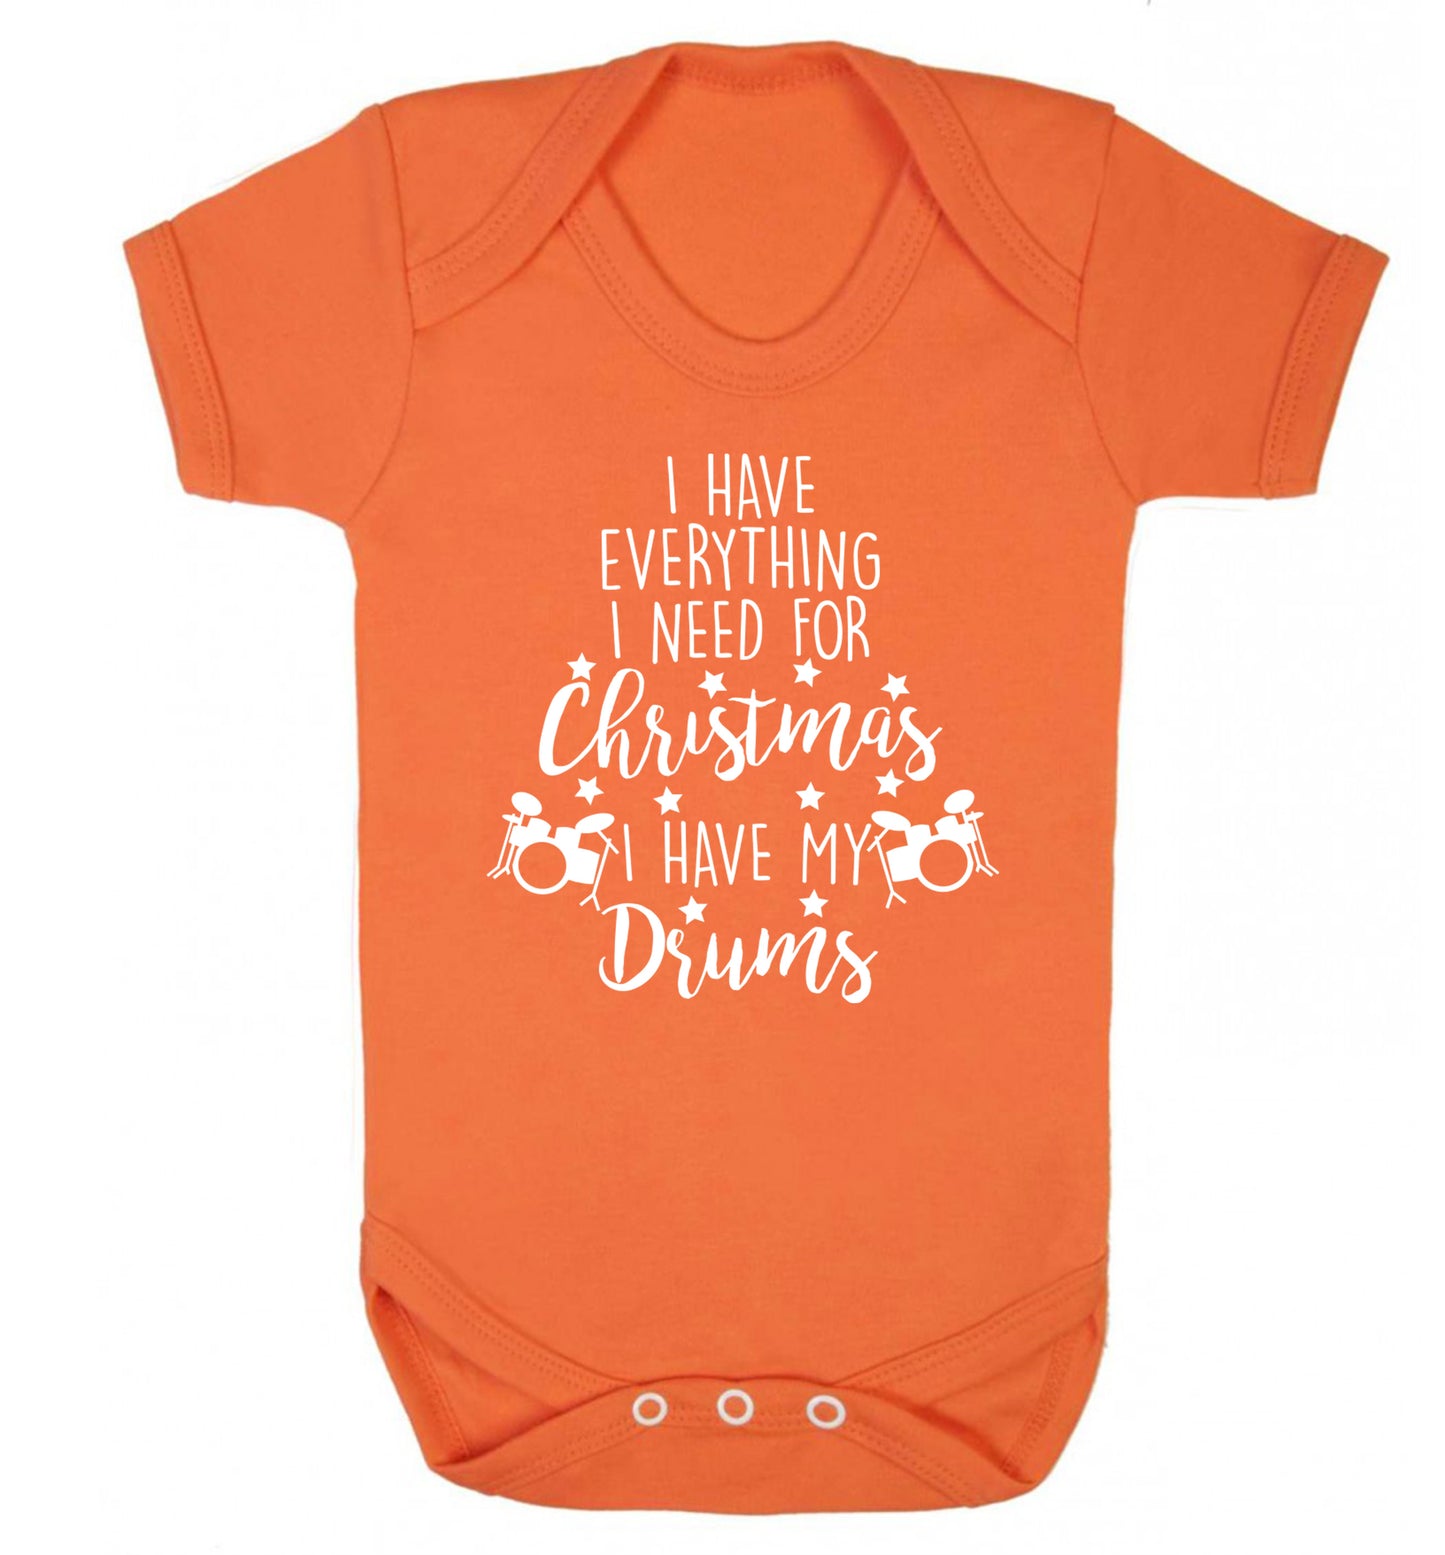 I have everything I need for Christmas I have my drums! Baby Vest orange 18-24 months